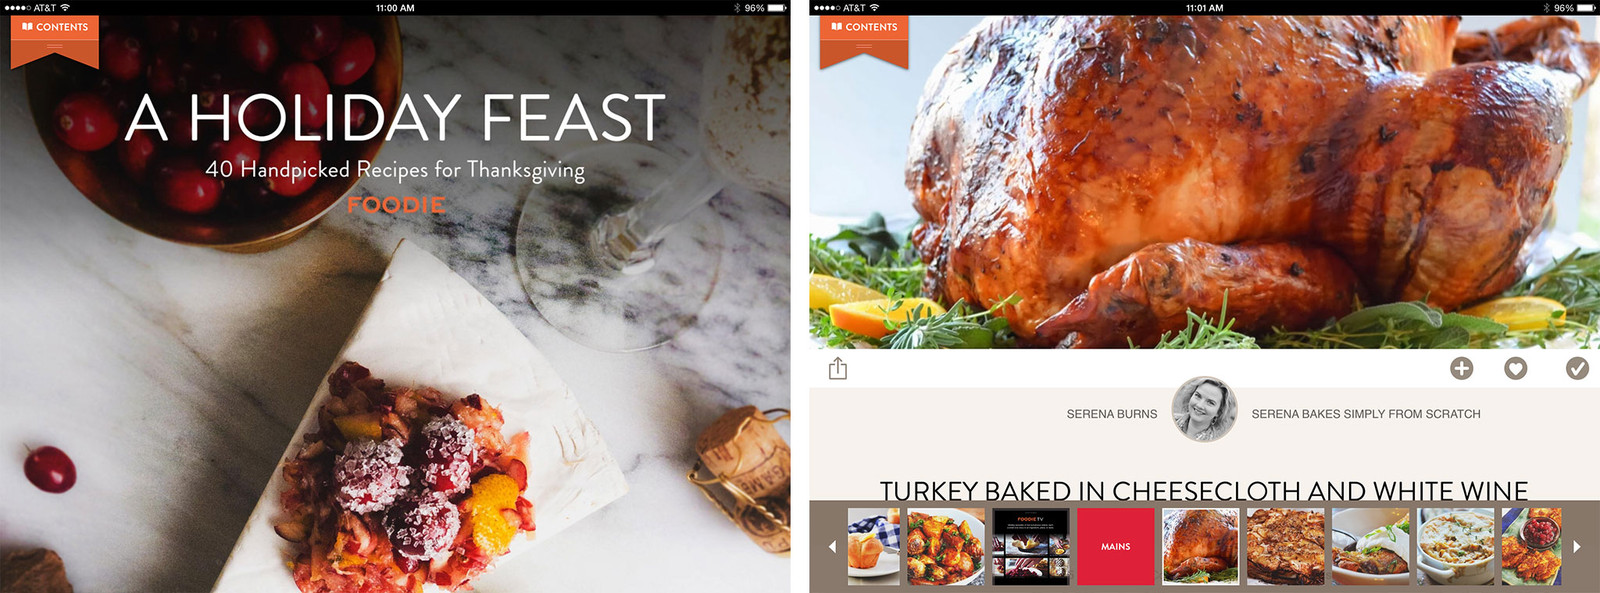 Apps to Help you get ready for the holidays - Foodie Recipes iPad Screenshots